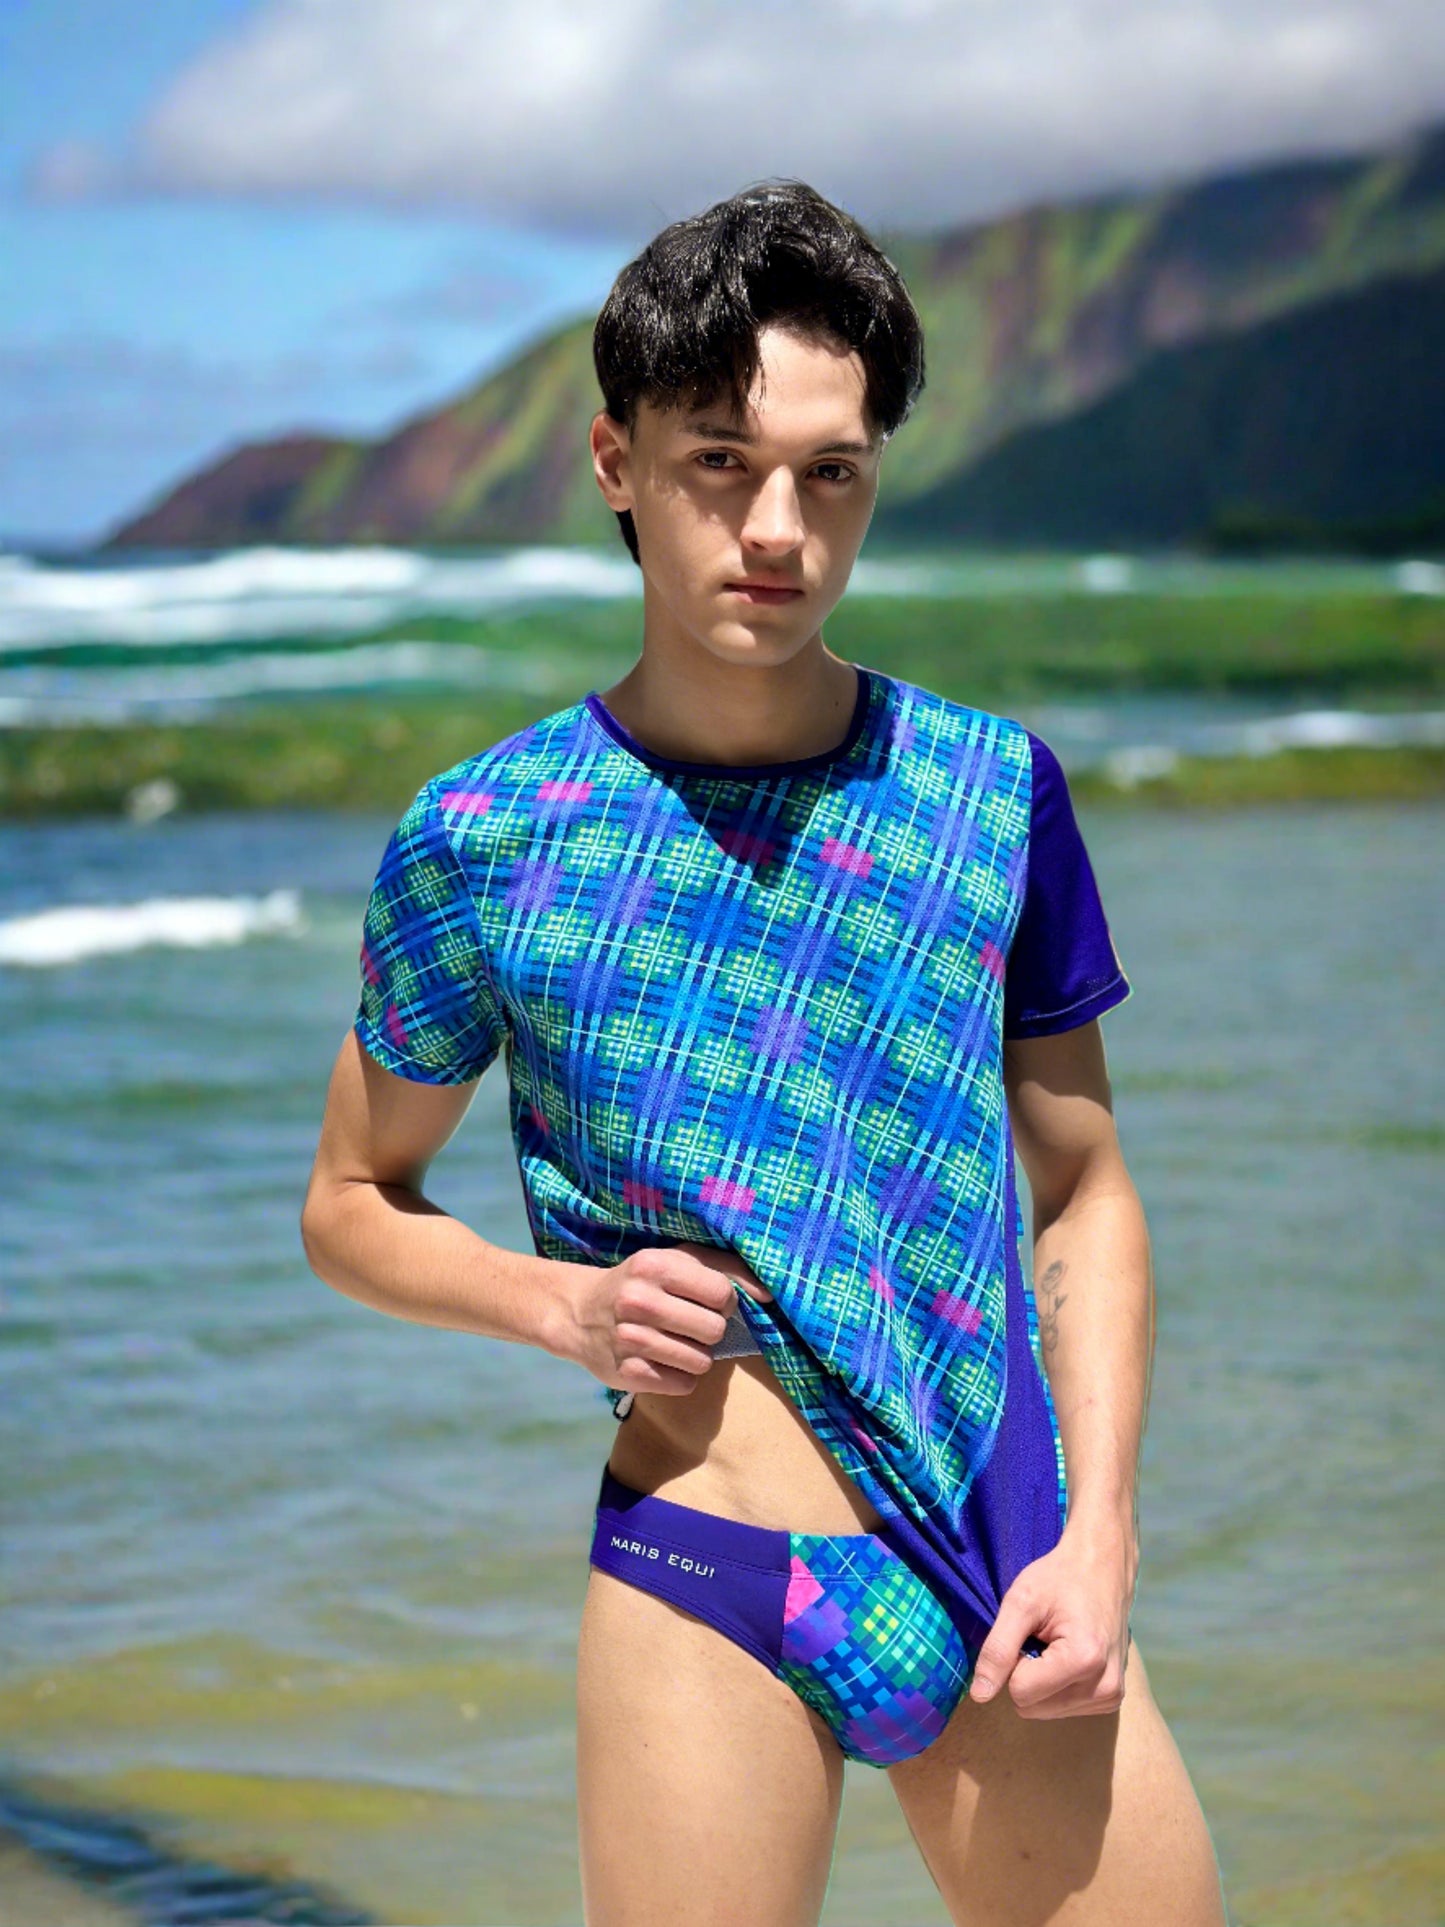 Our Blue Tartan Swim Brief and Sport Shirt For Men. The suit haas a Speedo style cut.